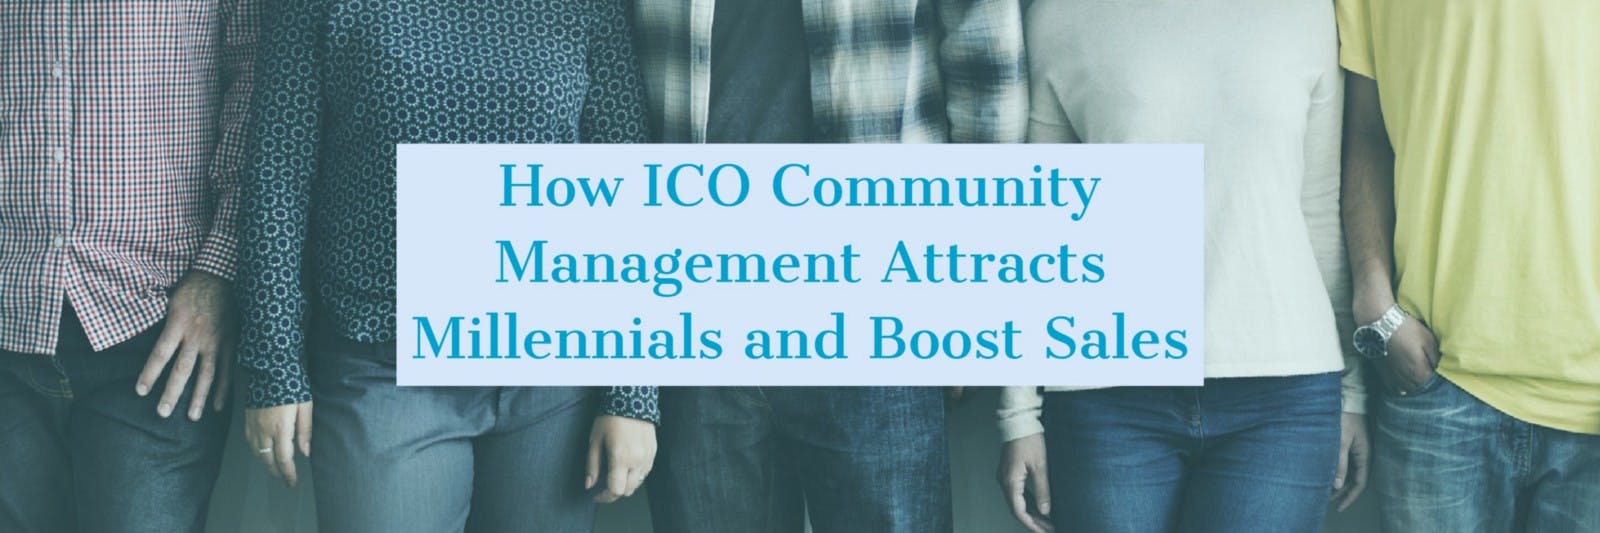 featured image - How ICO Community Management Attracts Millennial and Boost Sales